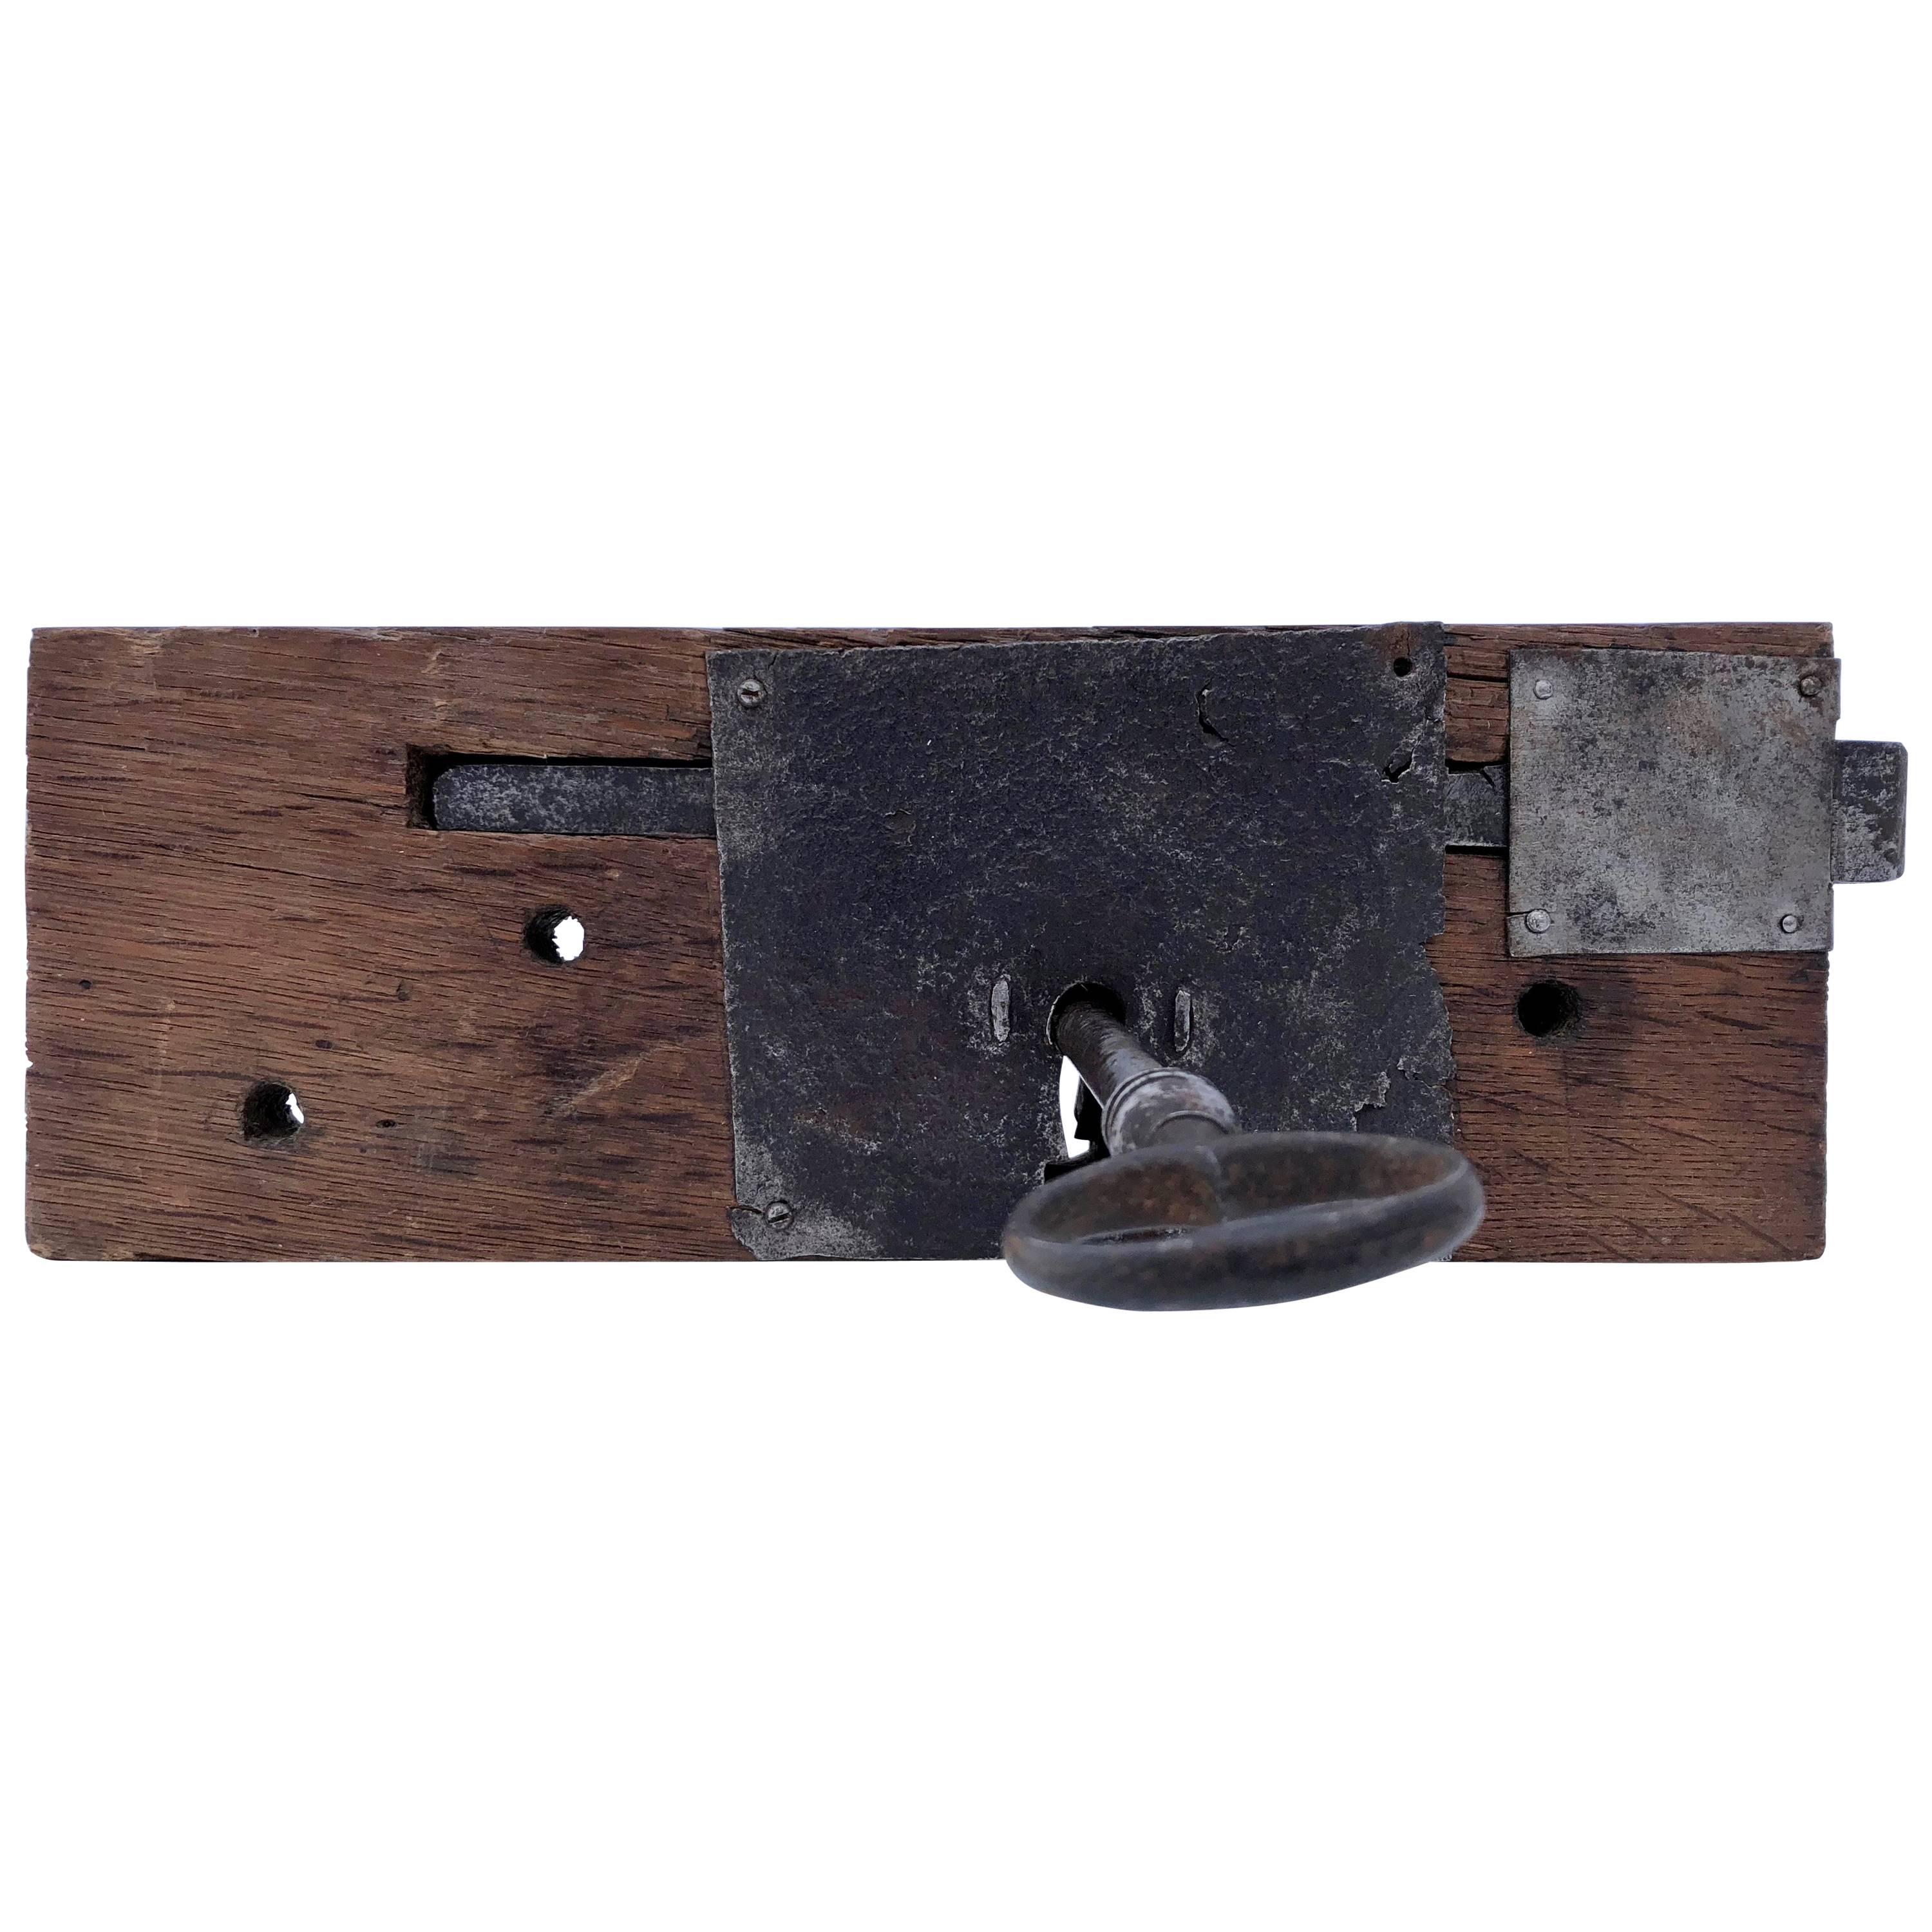 French Hand-Wrought Iron Mortise Mount Lock with Key on Wood Base, 1700s-1800s